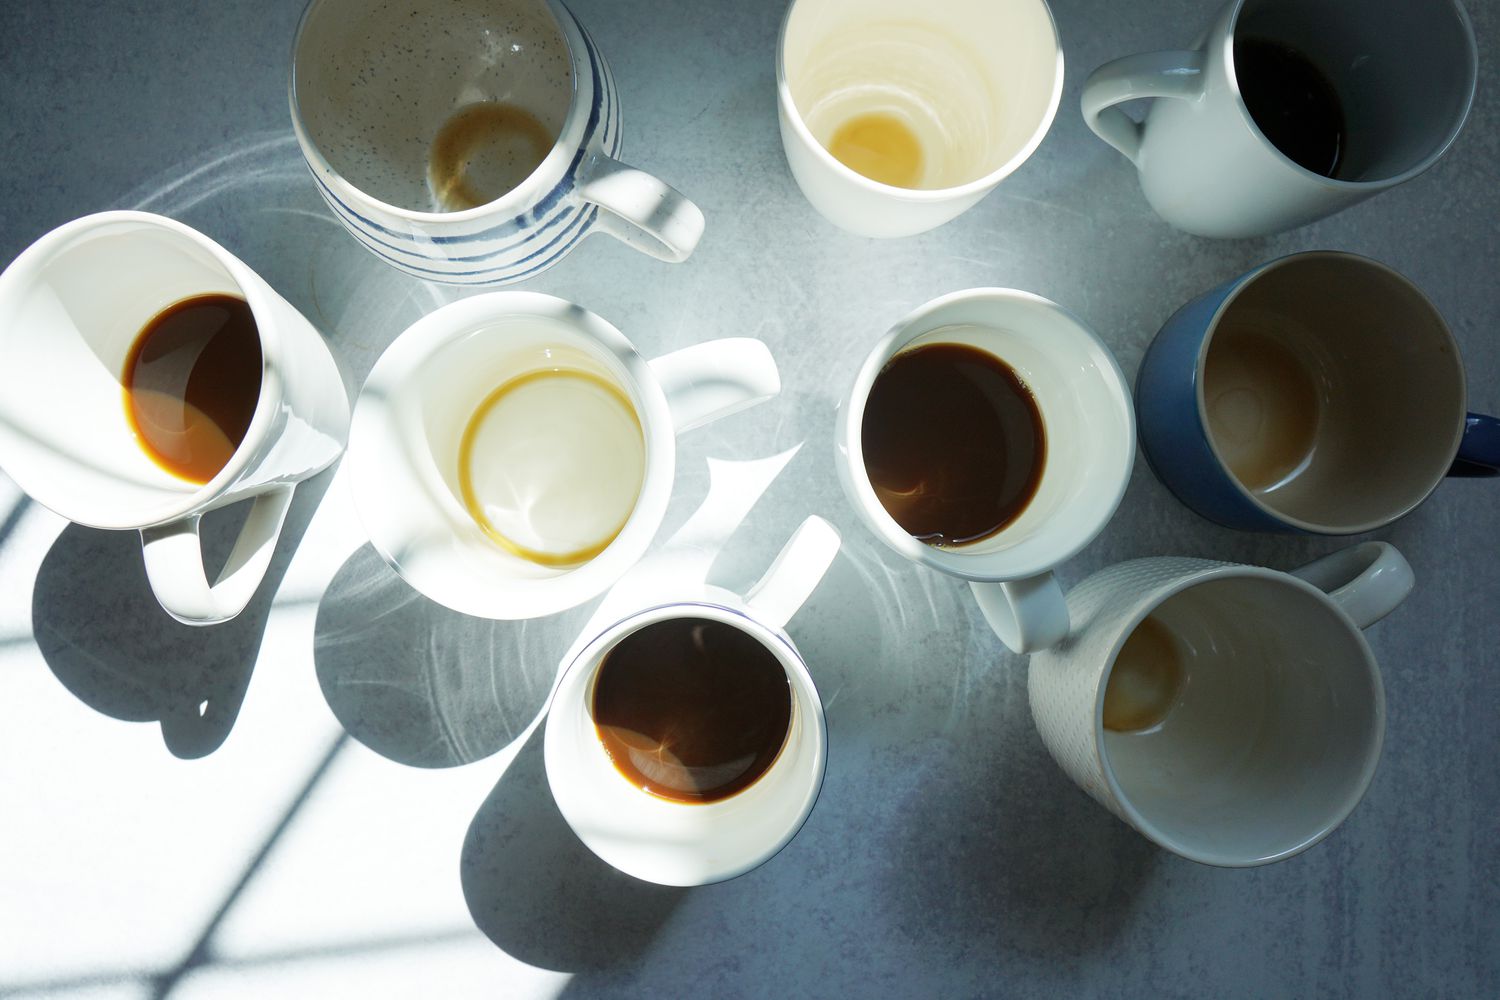 several coffee mugs on a grey surface: some half full of coffee, some empty